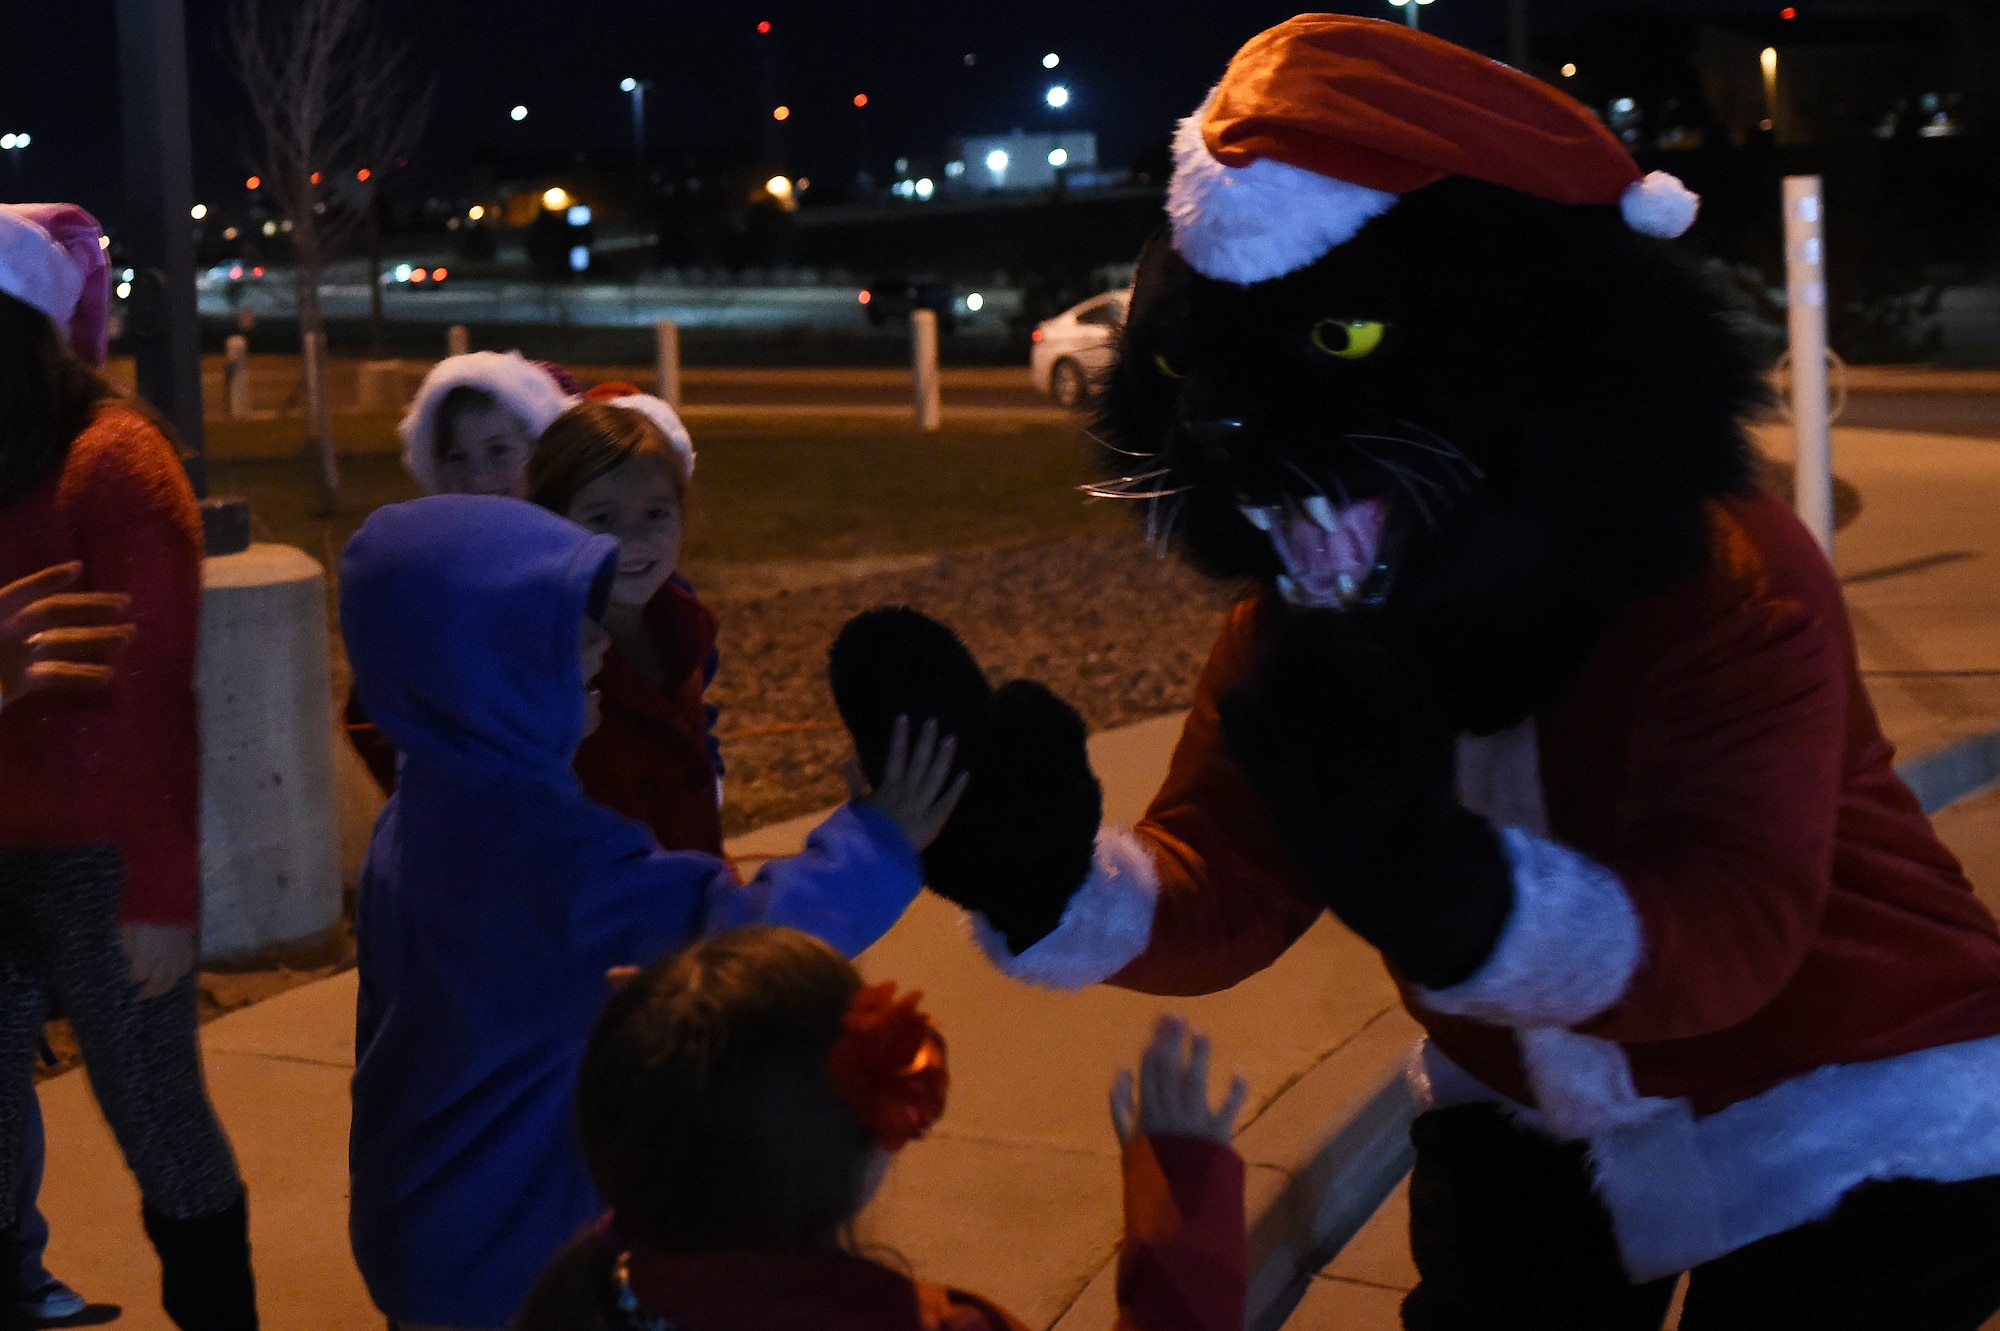 Team Buckley children high-five the 460th Space Wing mascot, Buck Lee, dressed as Santa Claus, during a tree-lighting ceremony Dec. 9, 2014, at the 460th SW headquarters building on Buckley Air Force Base, Colo. The annual tree lighting concluded with hot chocolate and cookies. (U.S. Air Force photo by Airman 1st Class Samantha Saulsbury/Released)